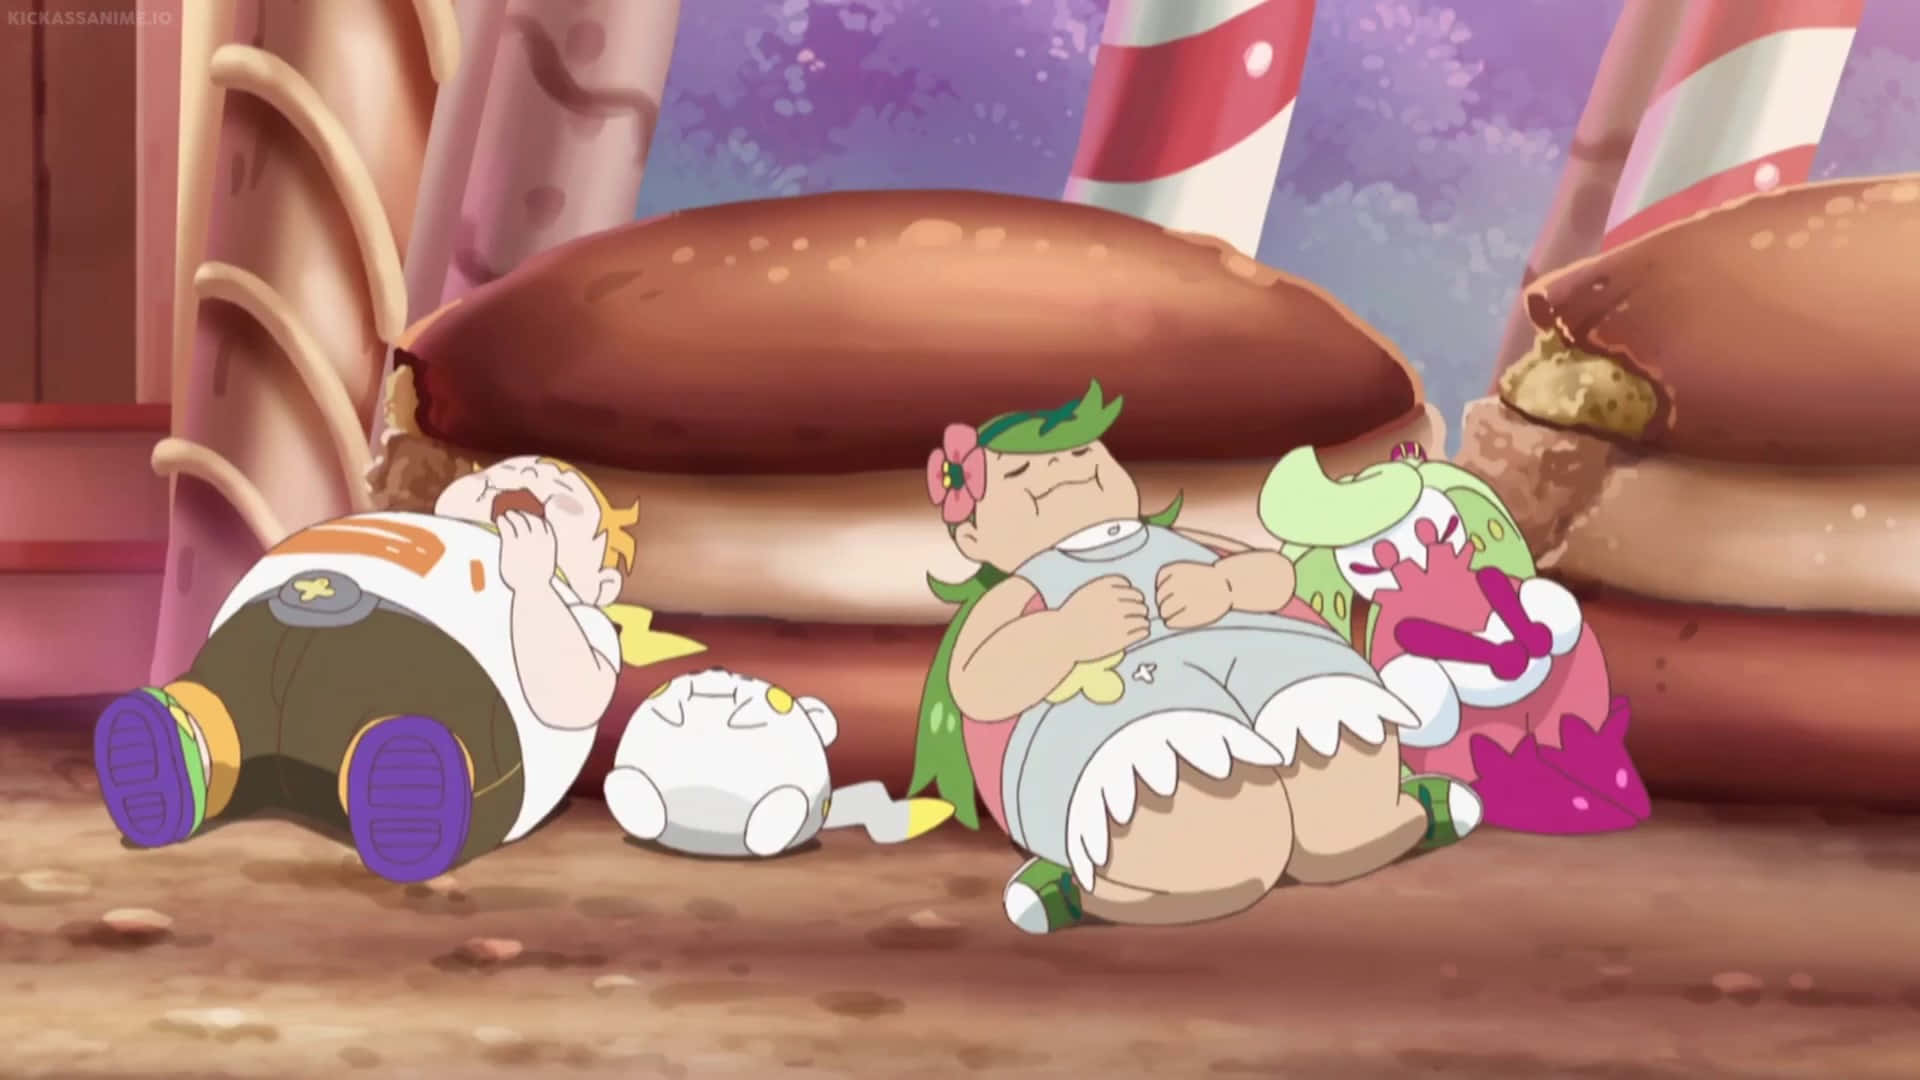 Togedemaru Sleeping Near Sophie and Mallow in the Pokémon Anime Wallpaper